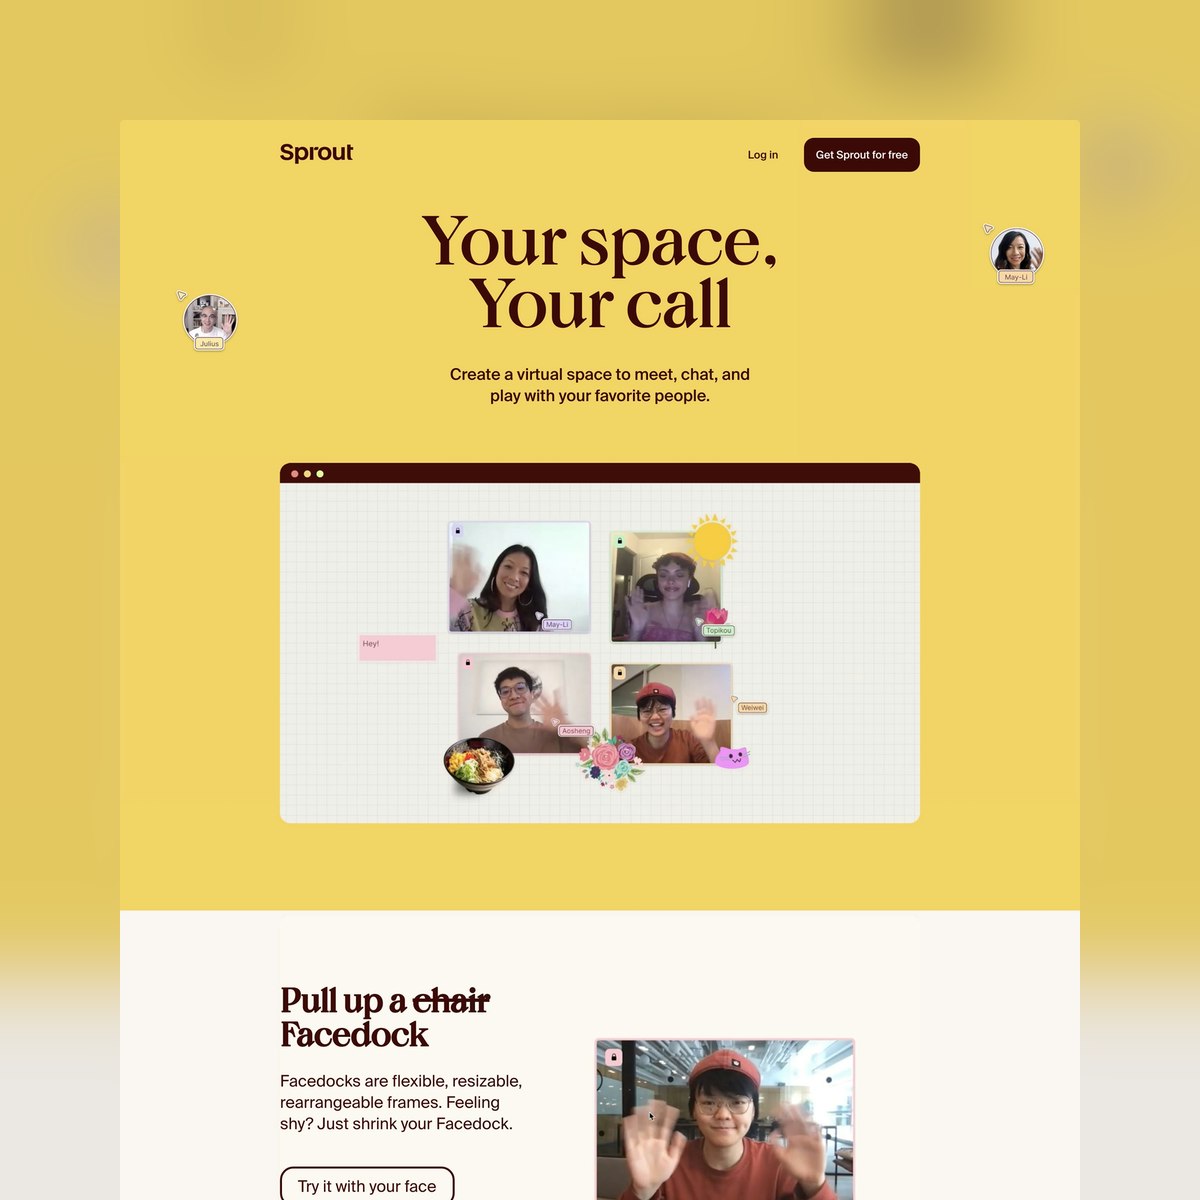 Product Page screen design idea #369: Website Inspiration: Sprout